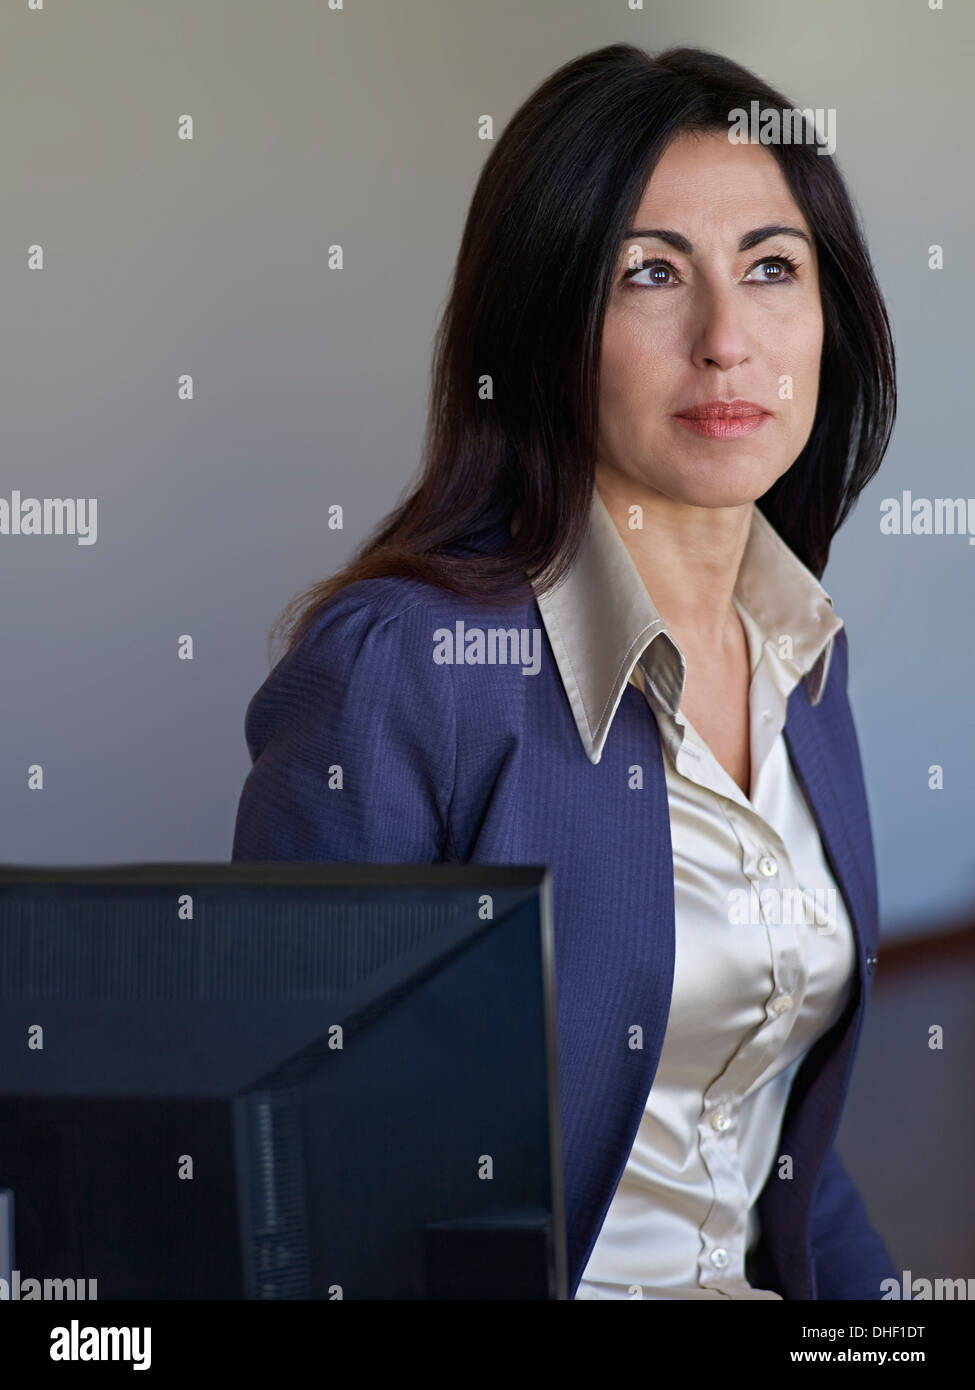 Portrait of businesswoman wearing jacket and blouse Stock Photo